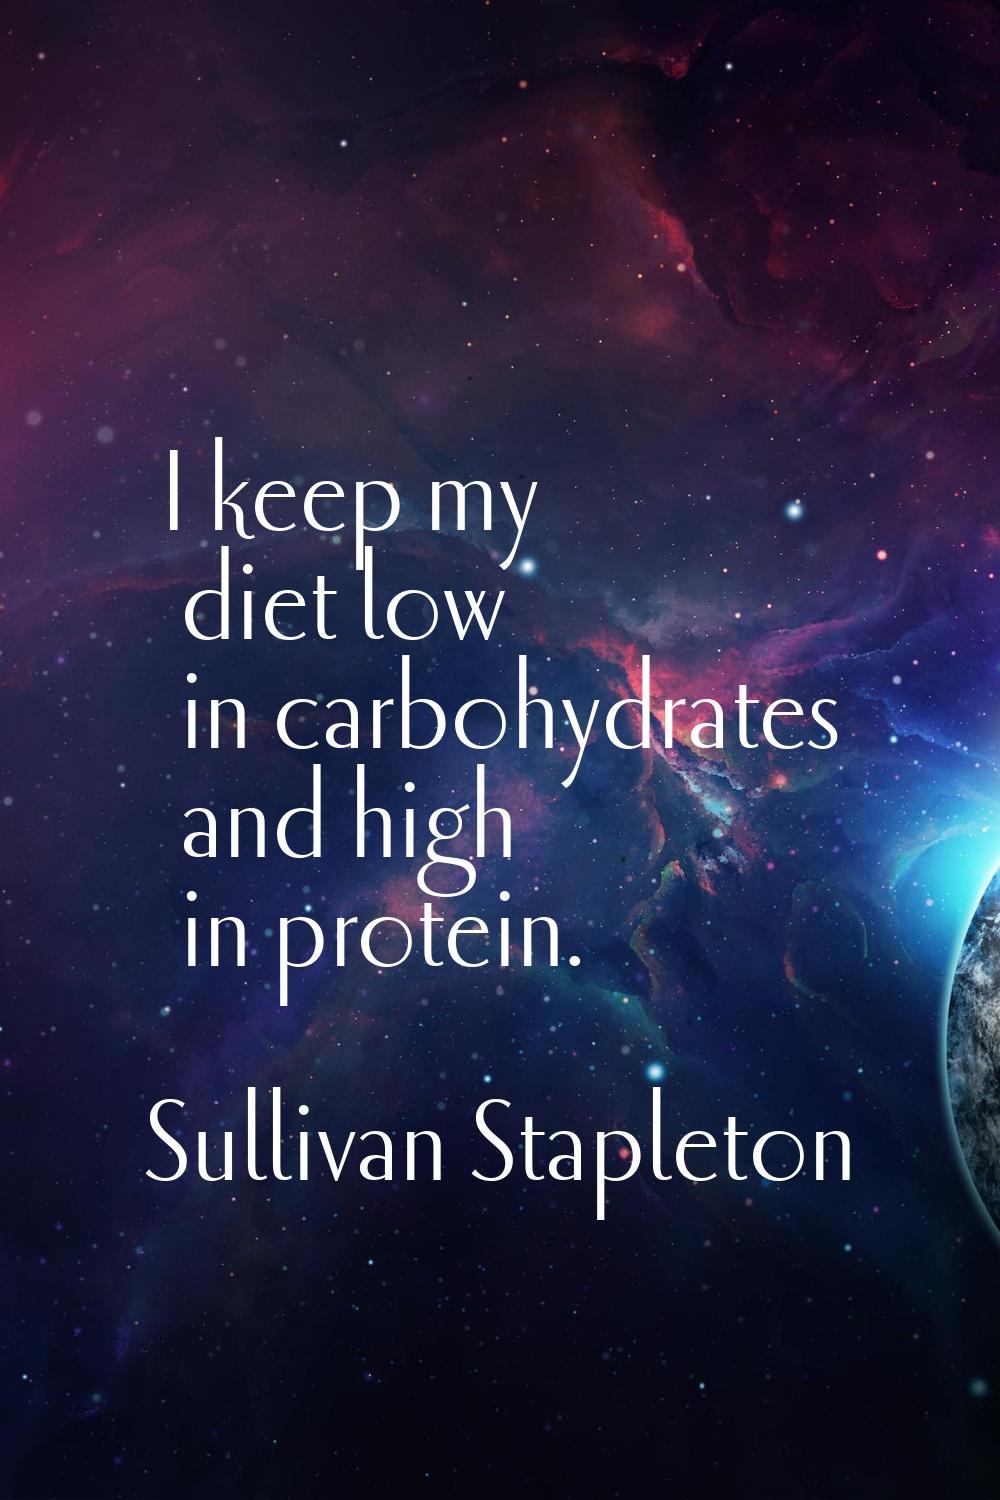 I keep my diet low in carbohydrates and high in protein.